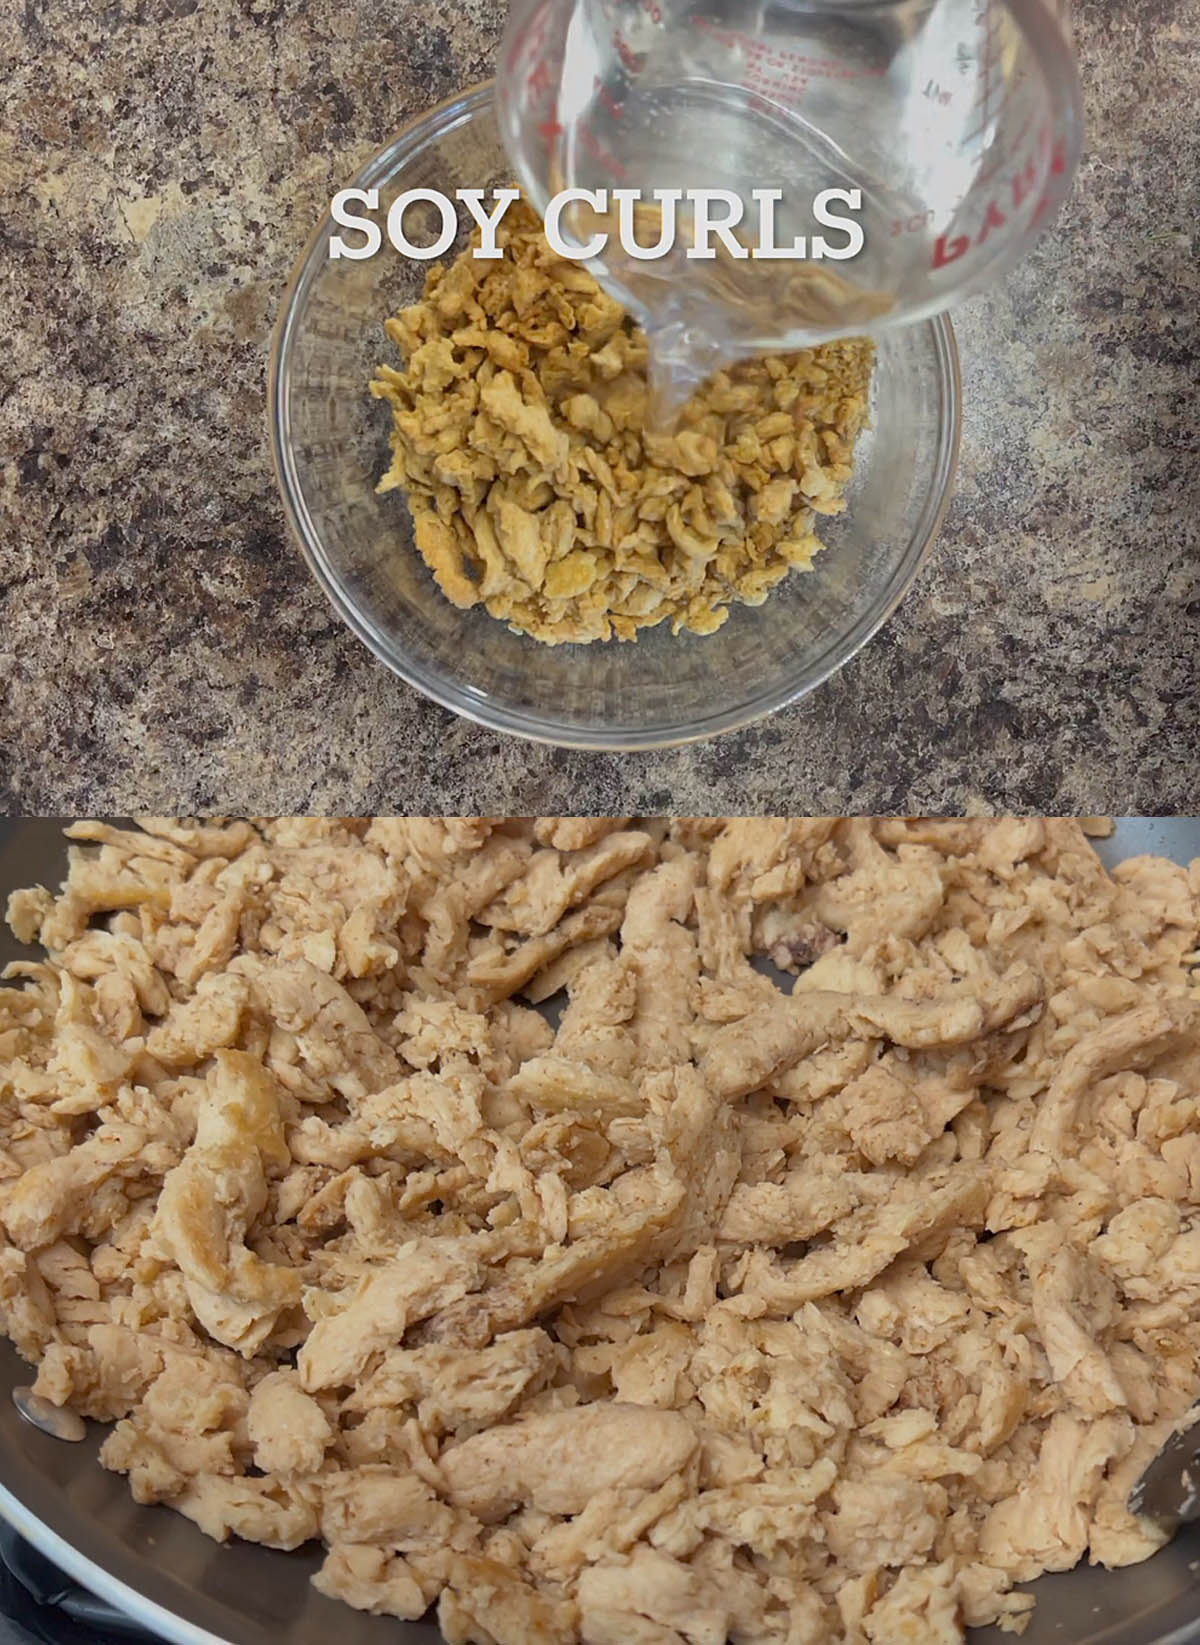 Soy curls soaked in water, then in a skillet with spices.